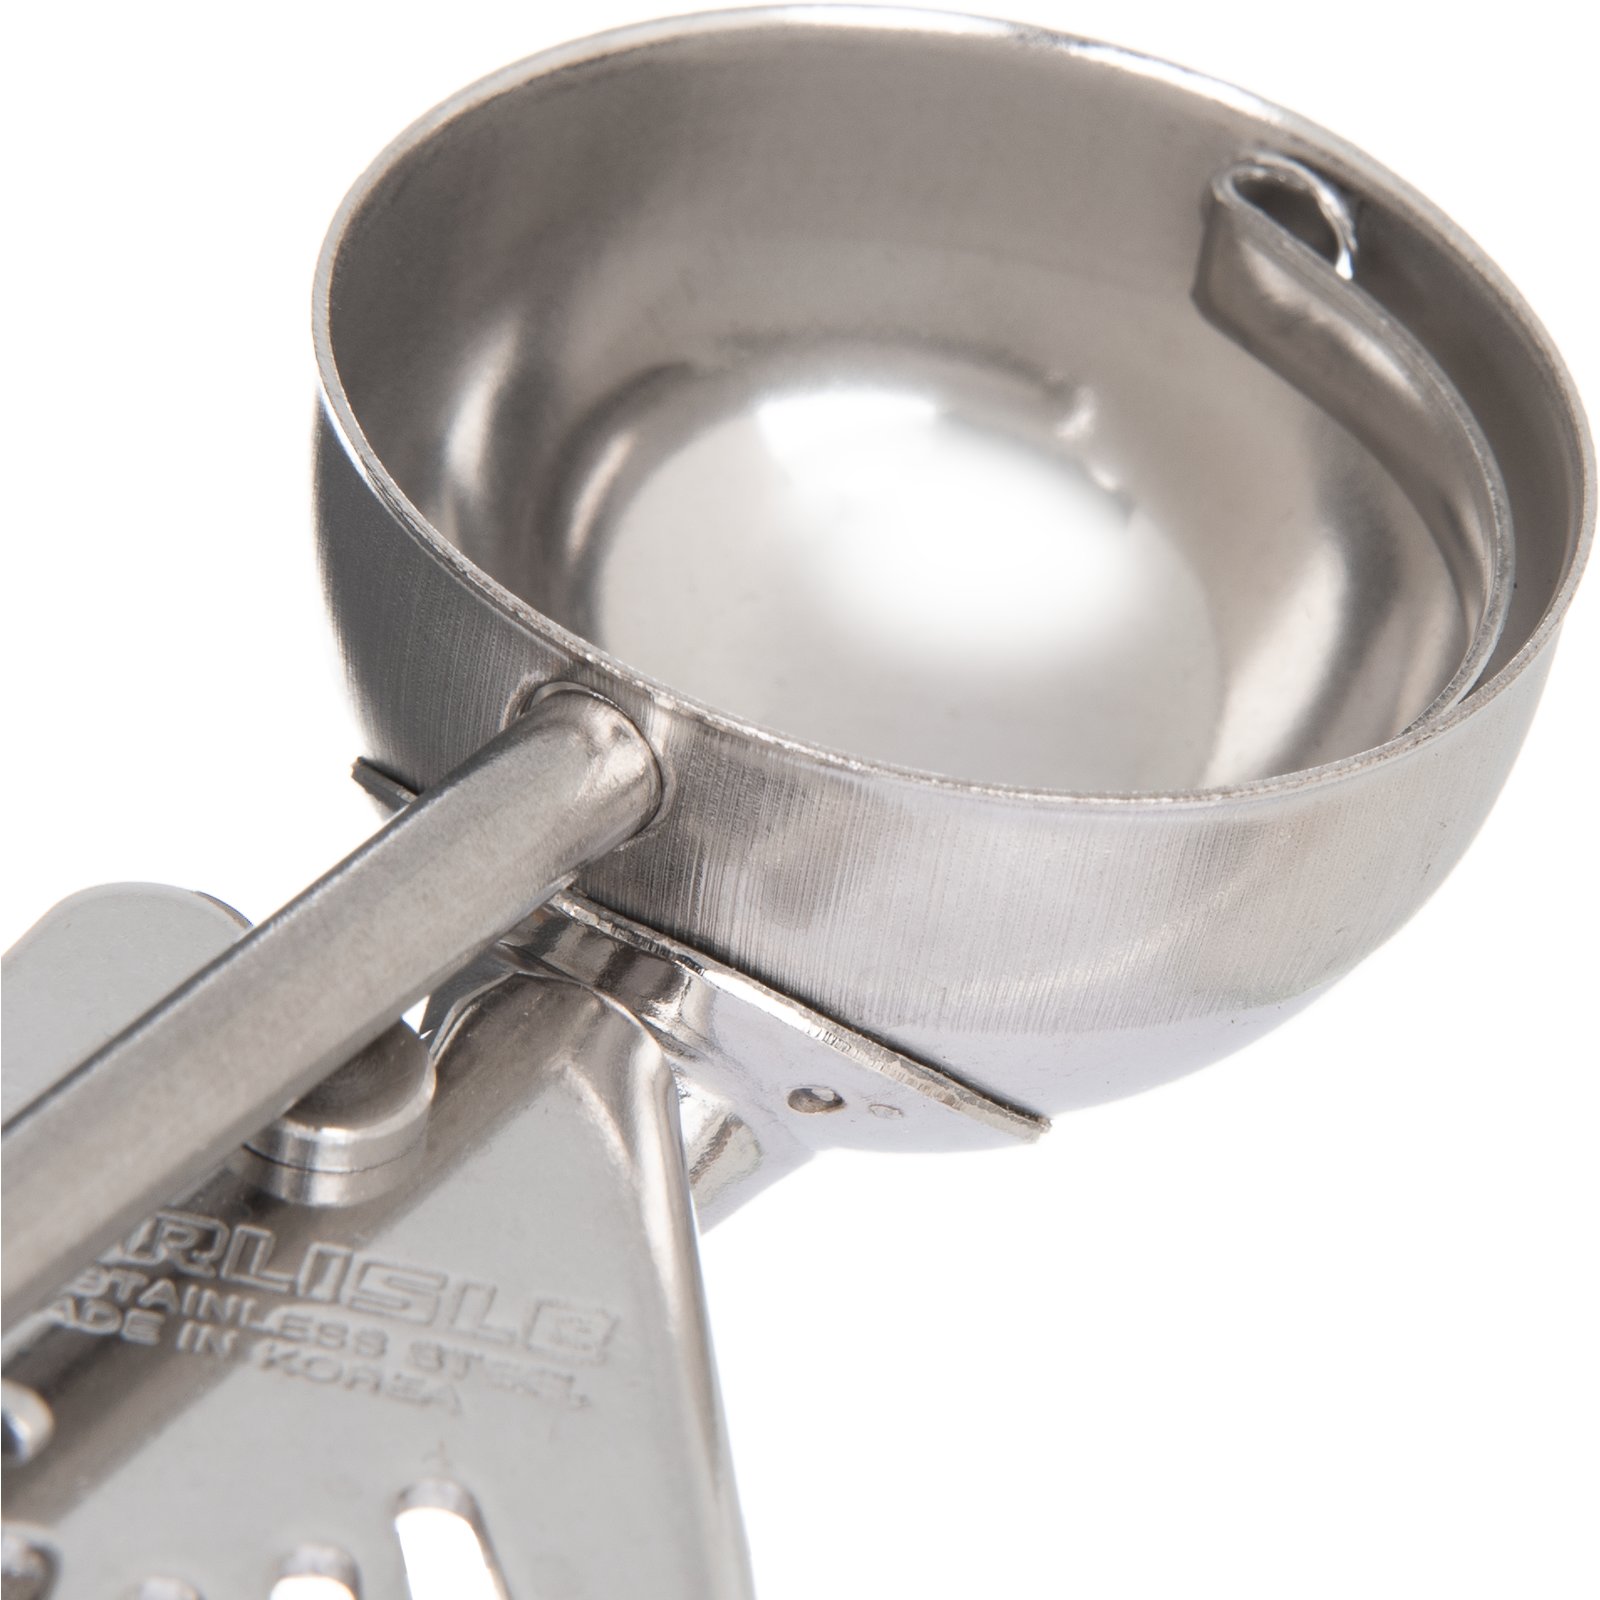 0.9 oz Carlisle 60300-40 Stainless Steel Portion Control Disher Scoop Orchid 